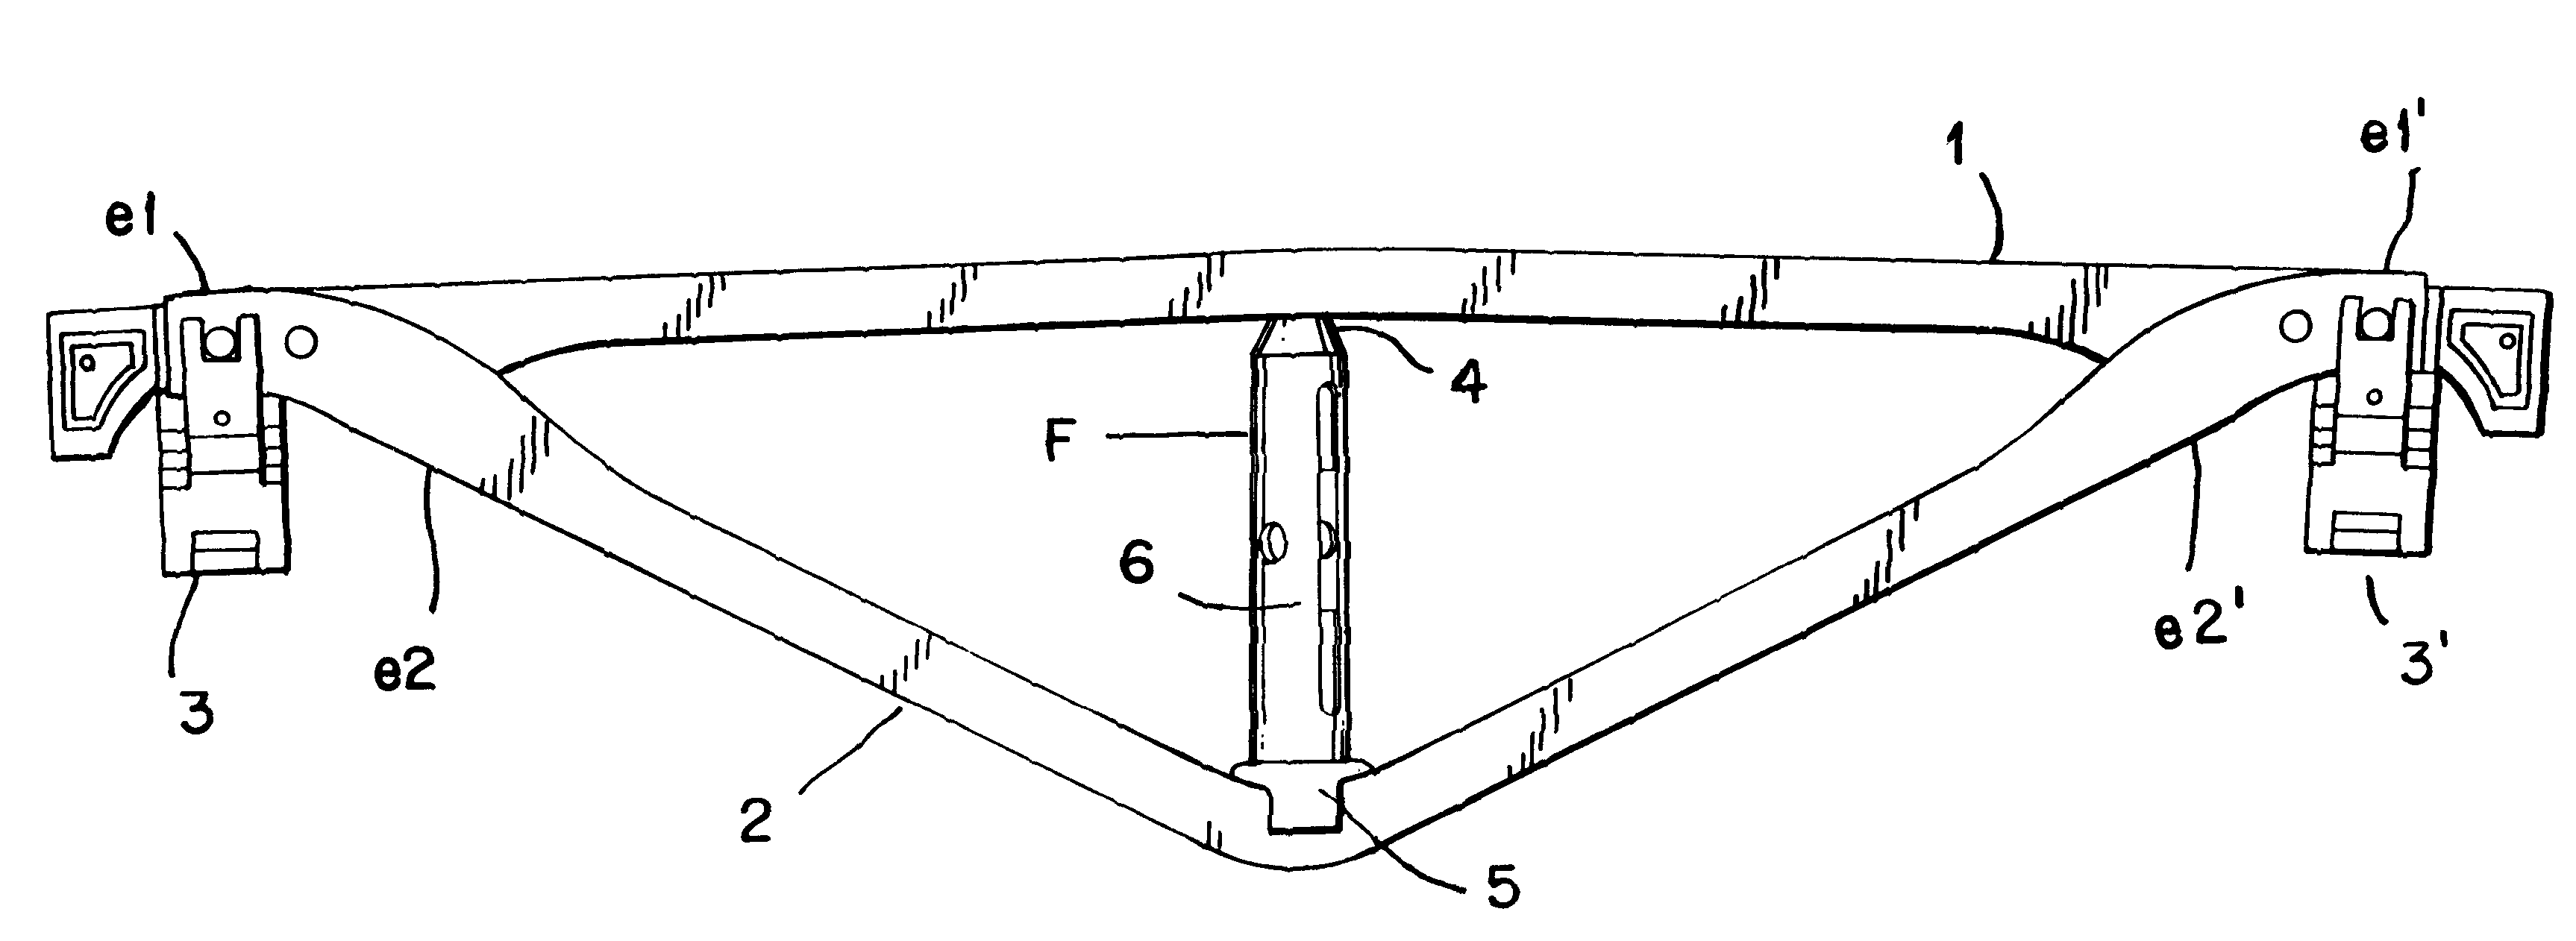 Reversible fulcrum for a strut